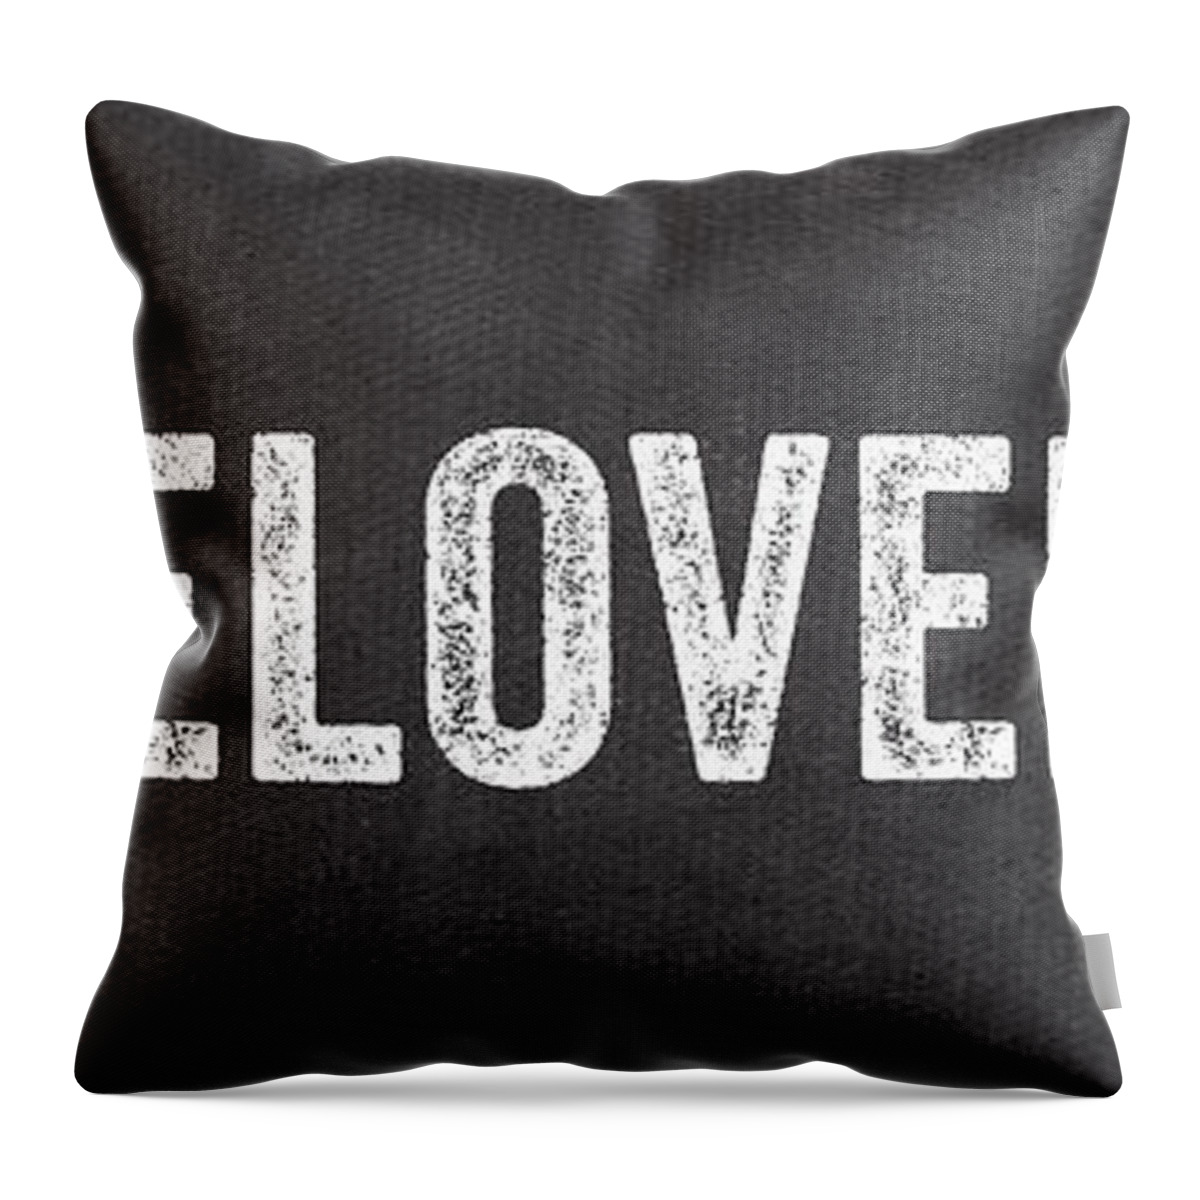 Live Throw Pillow featuring the mixed media Live Love Bake by Linda Woods